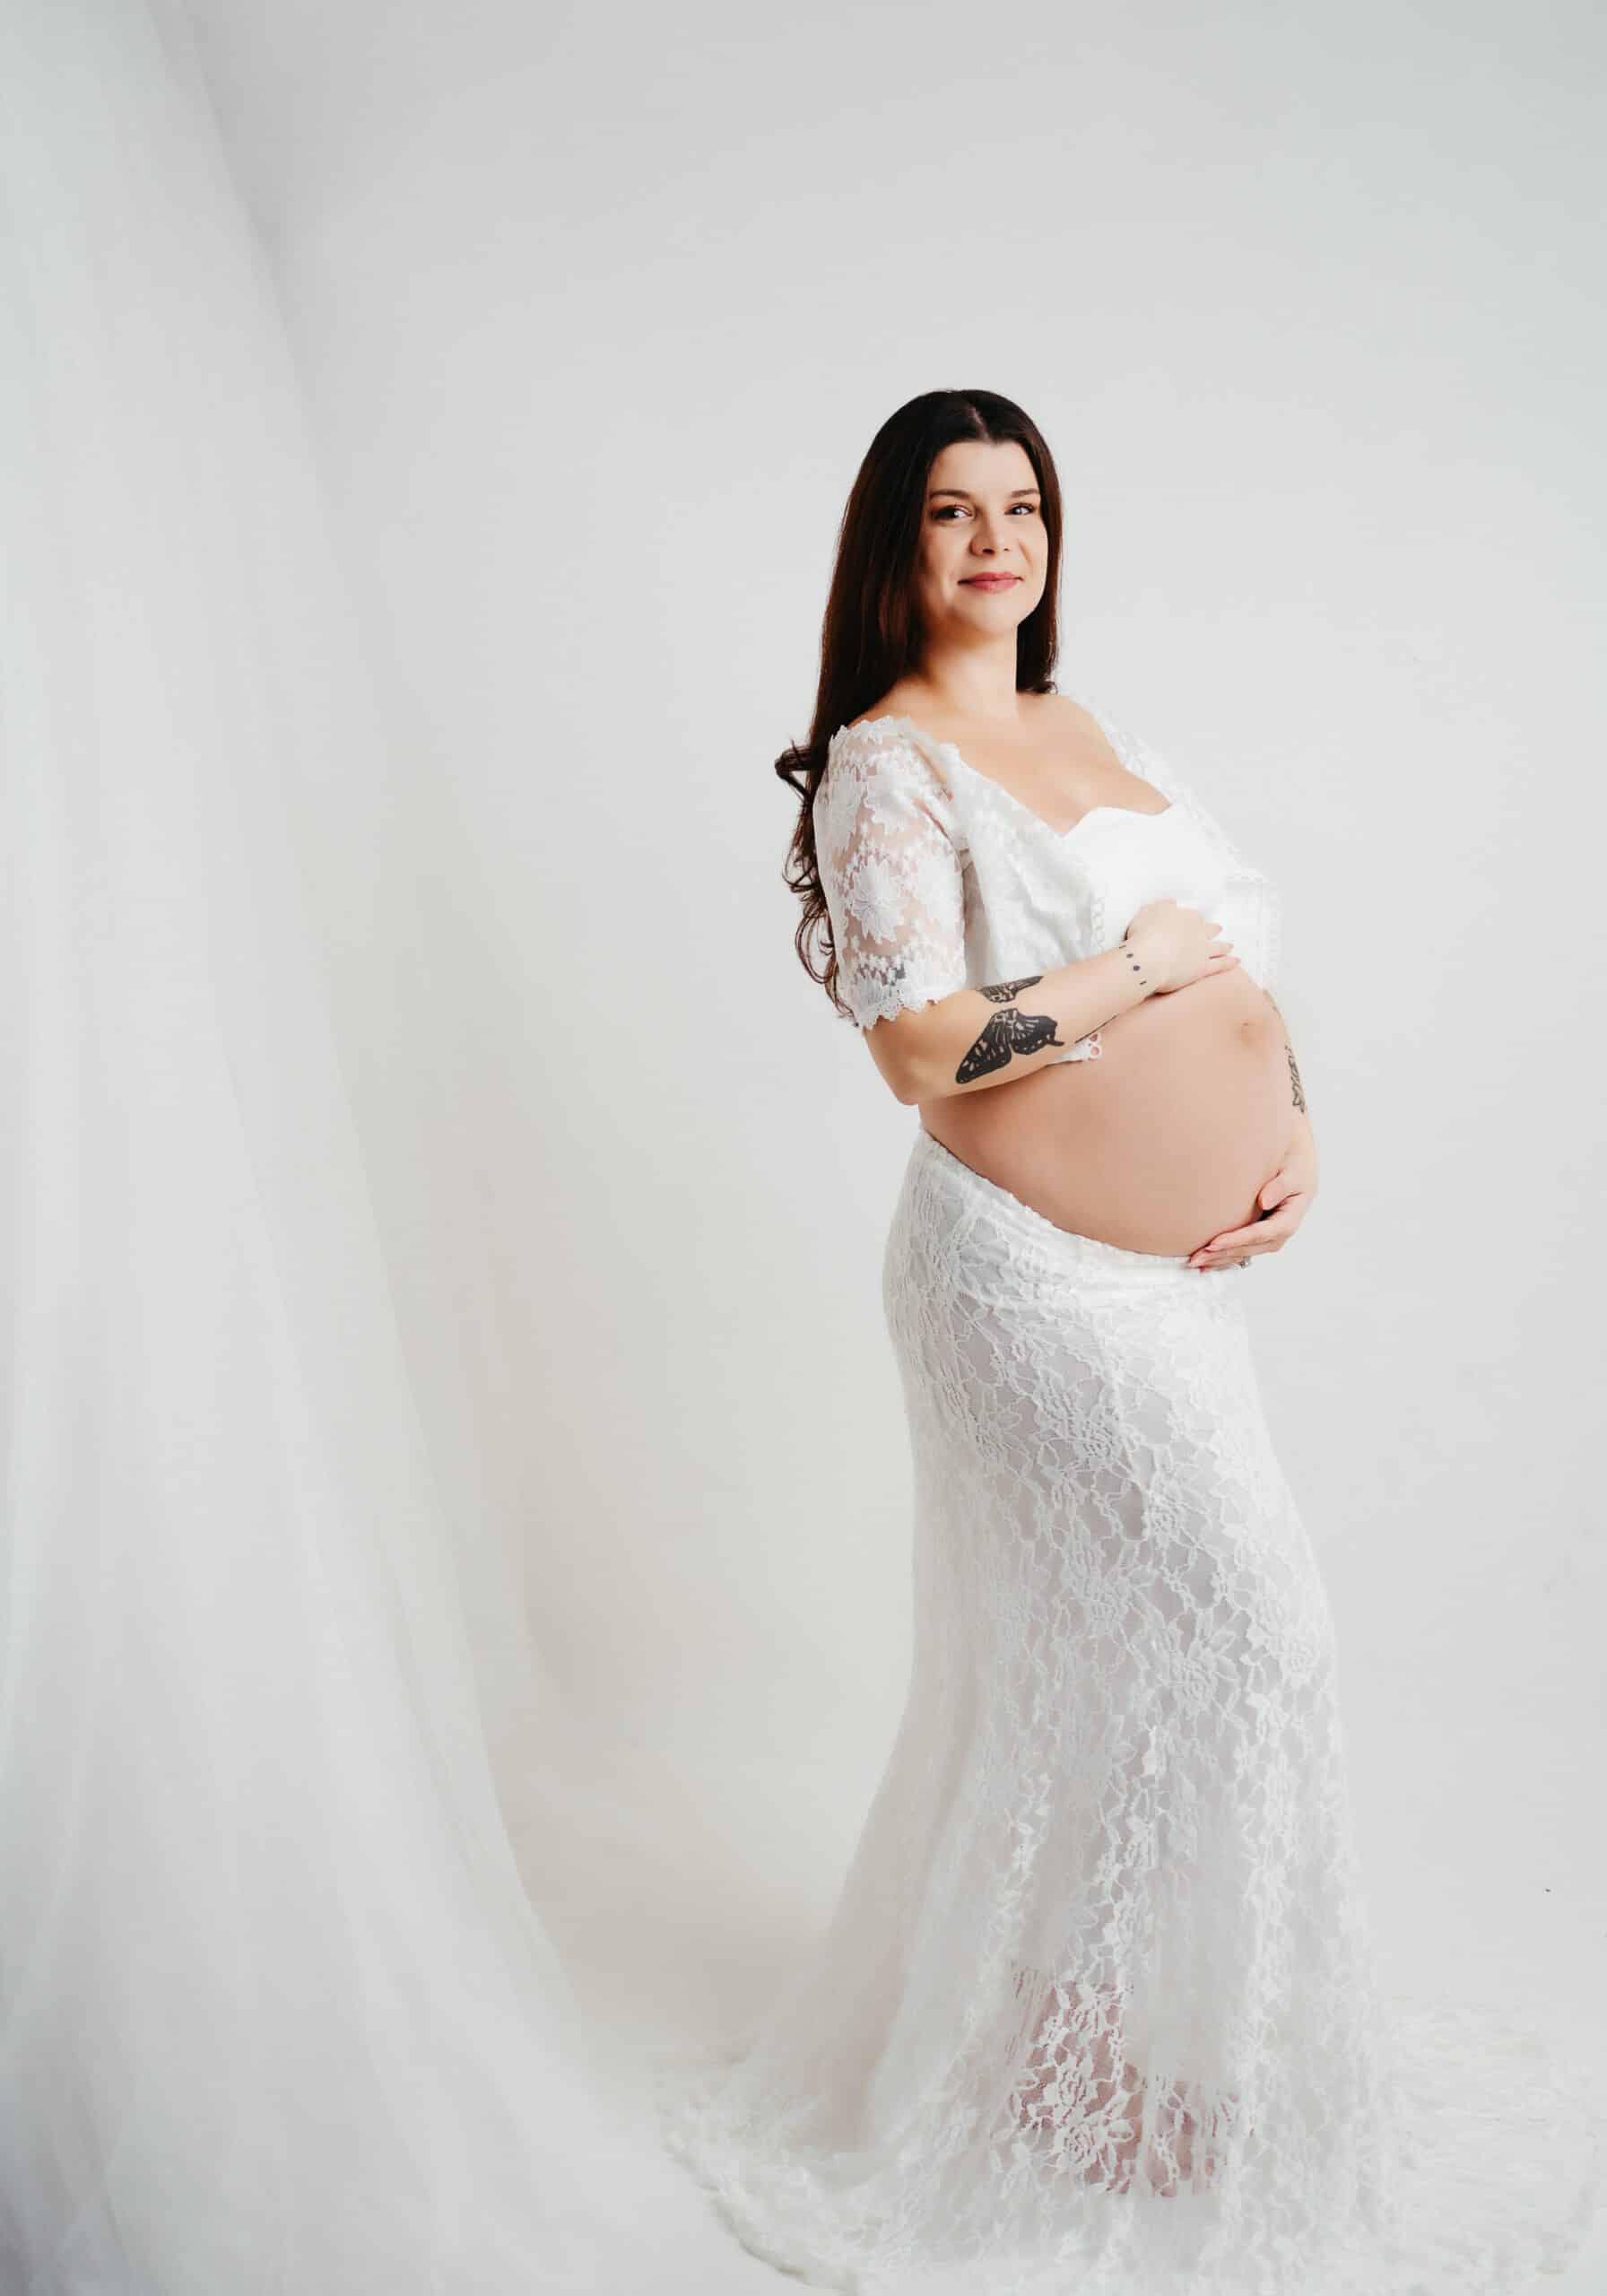 Serene white maternity session featuring a peaceful expectant mother in a clean and bright setting, highlighting the purity and tranquility of this special moment